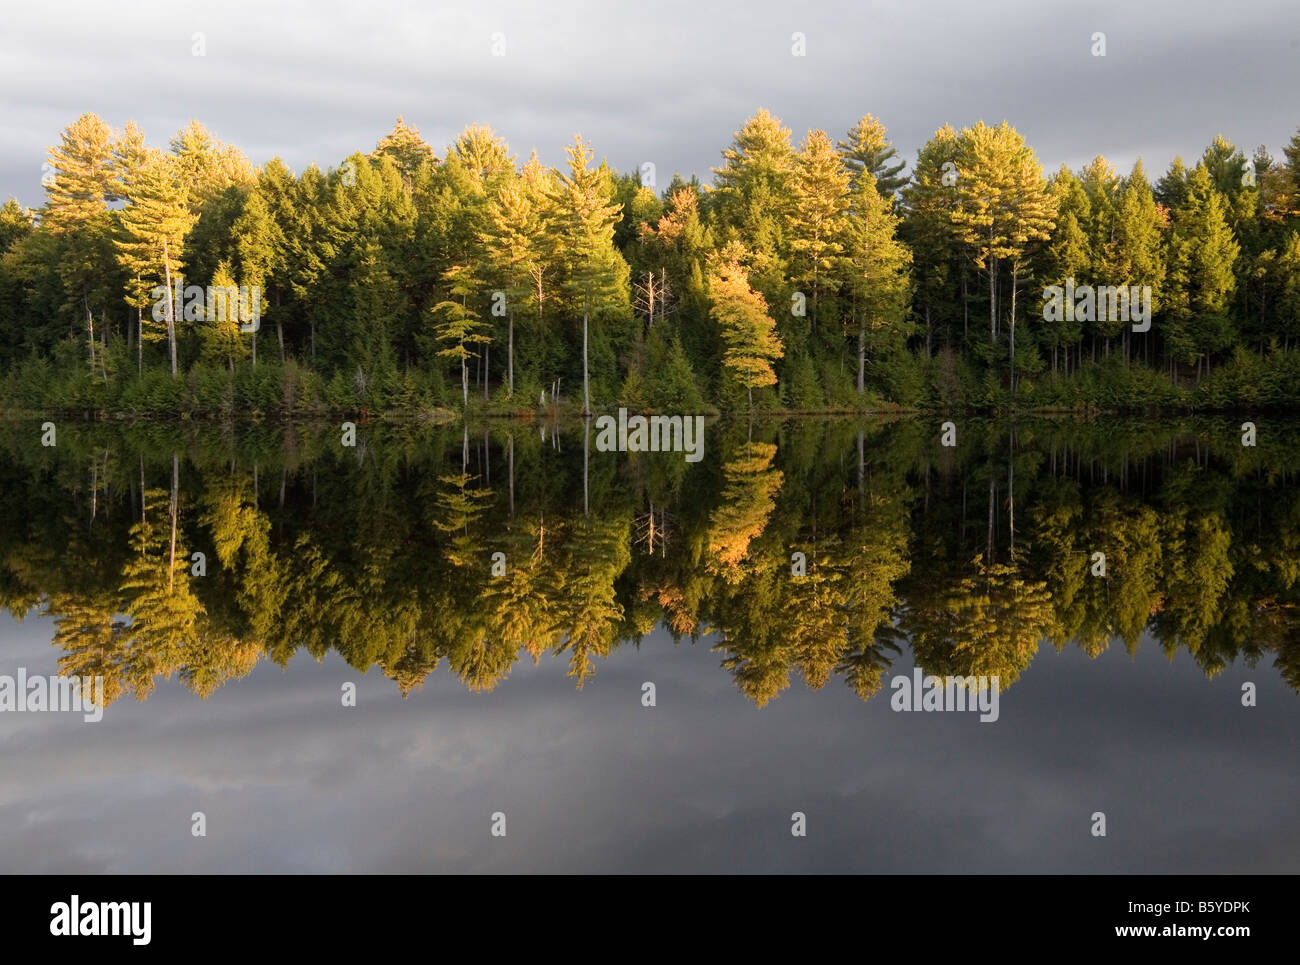 The late afternoon sun illuminates the treetops against a dark cloudy sky, all reflected in the perfectly still water of a lake. Stock Photo